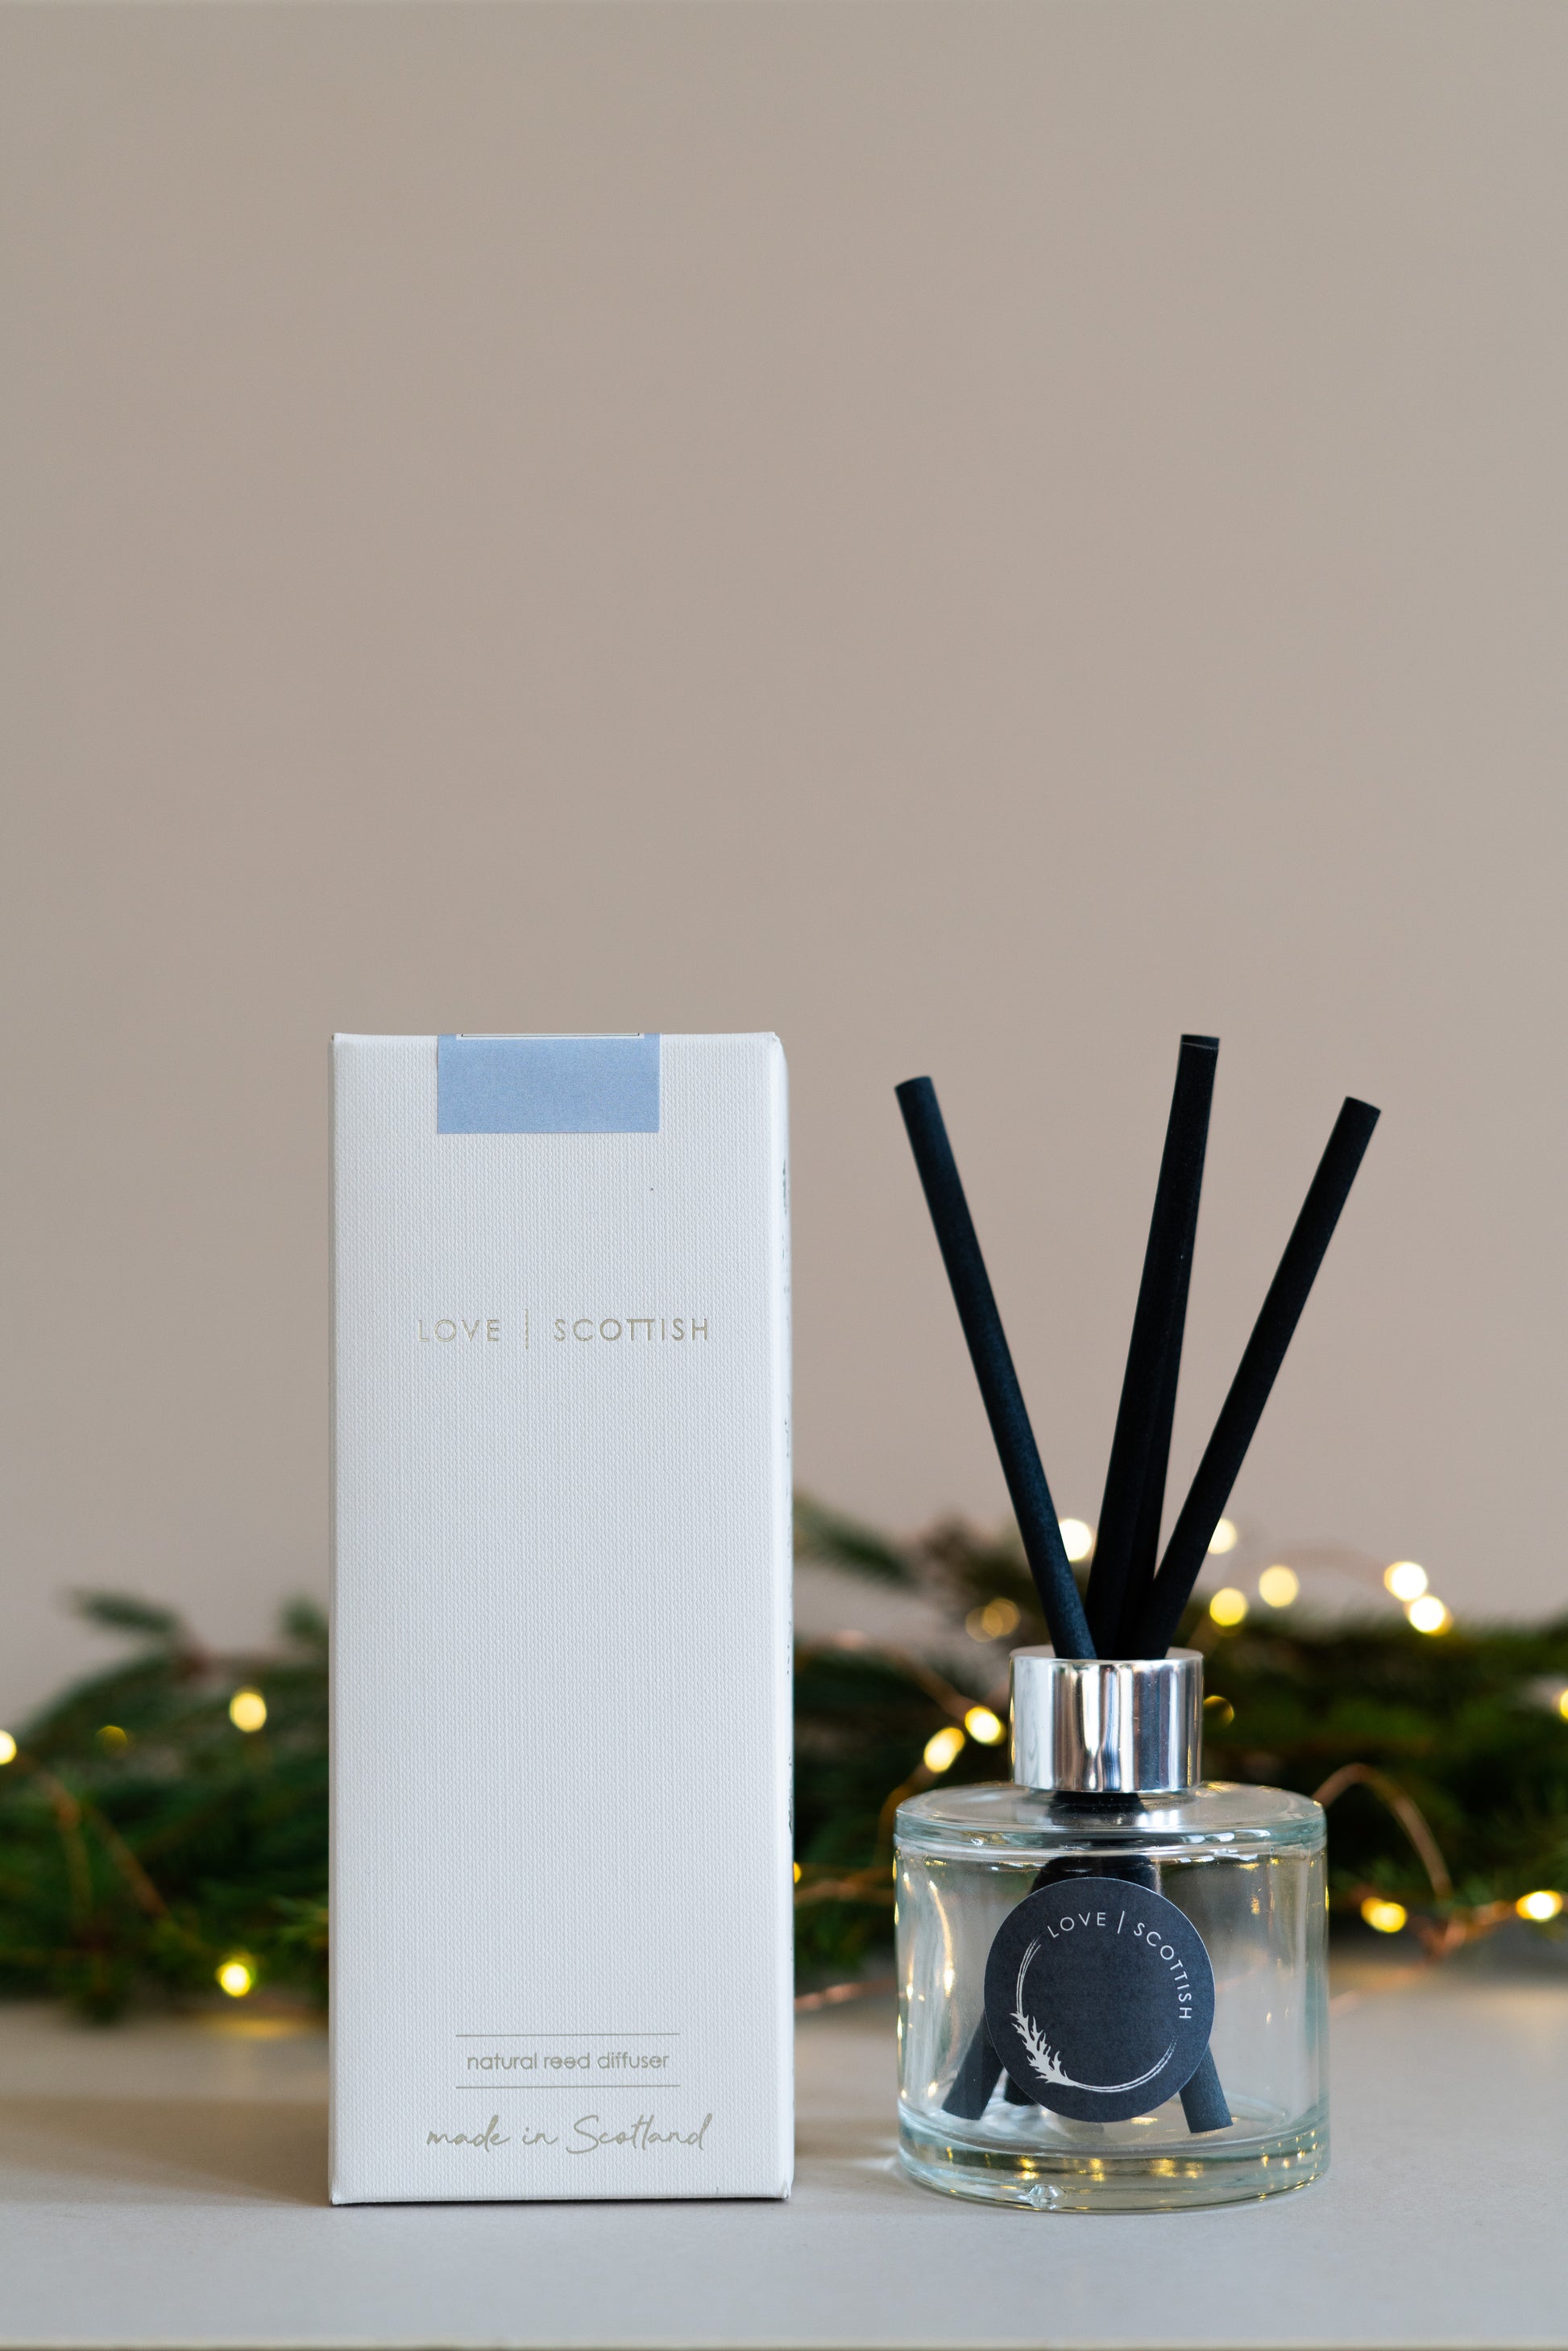 Love Scottish Snowy Nights Diffusers. Made in Scotland.